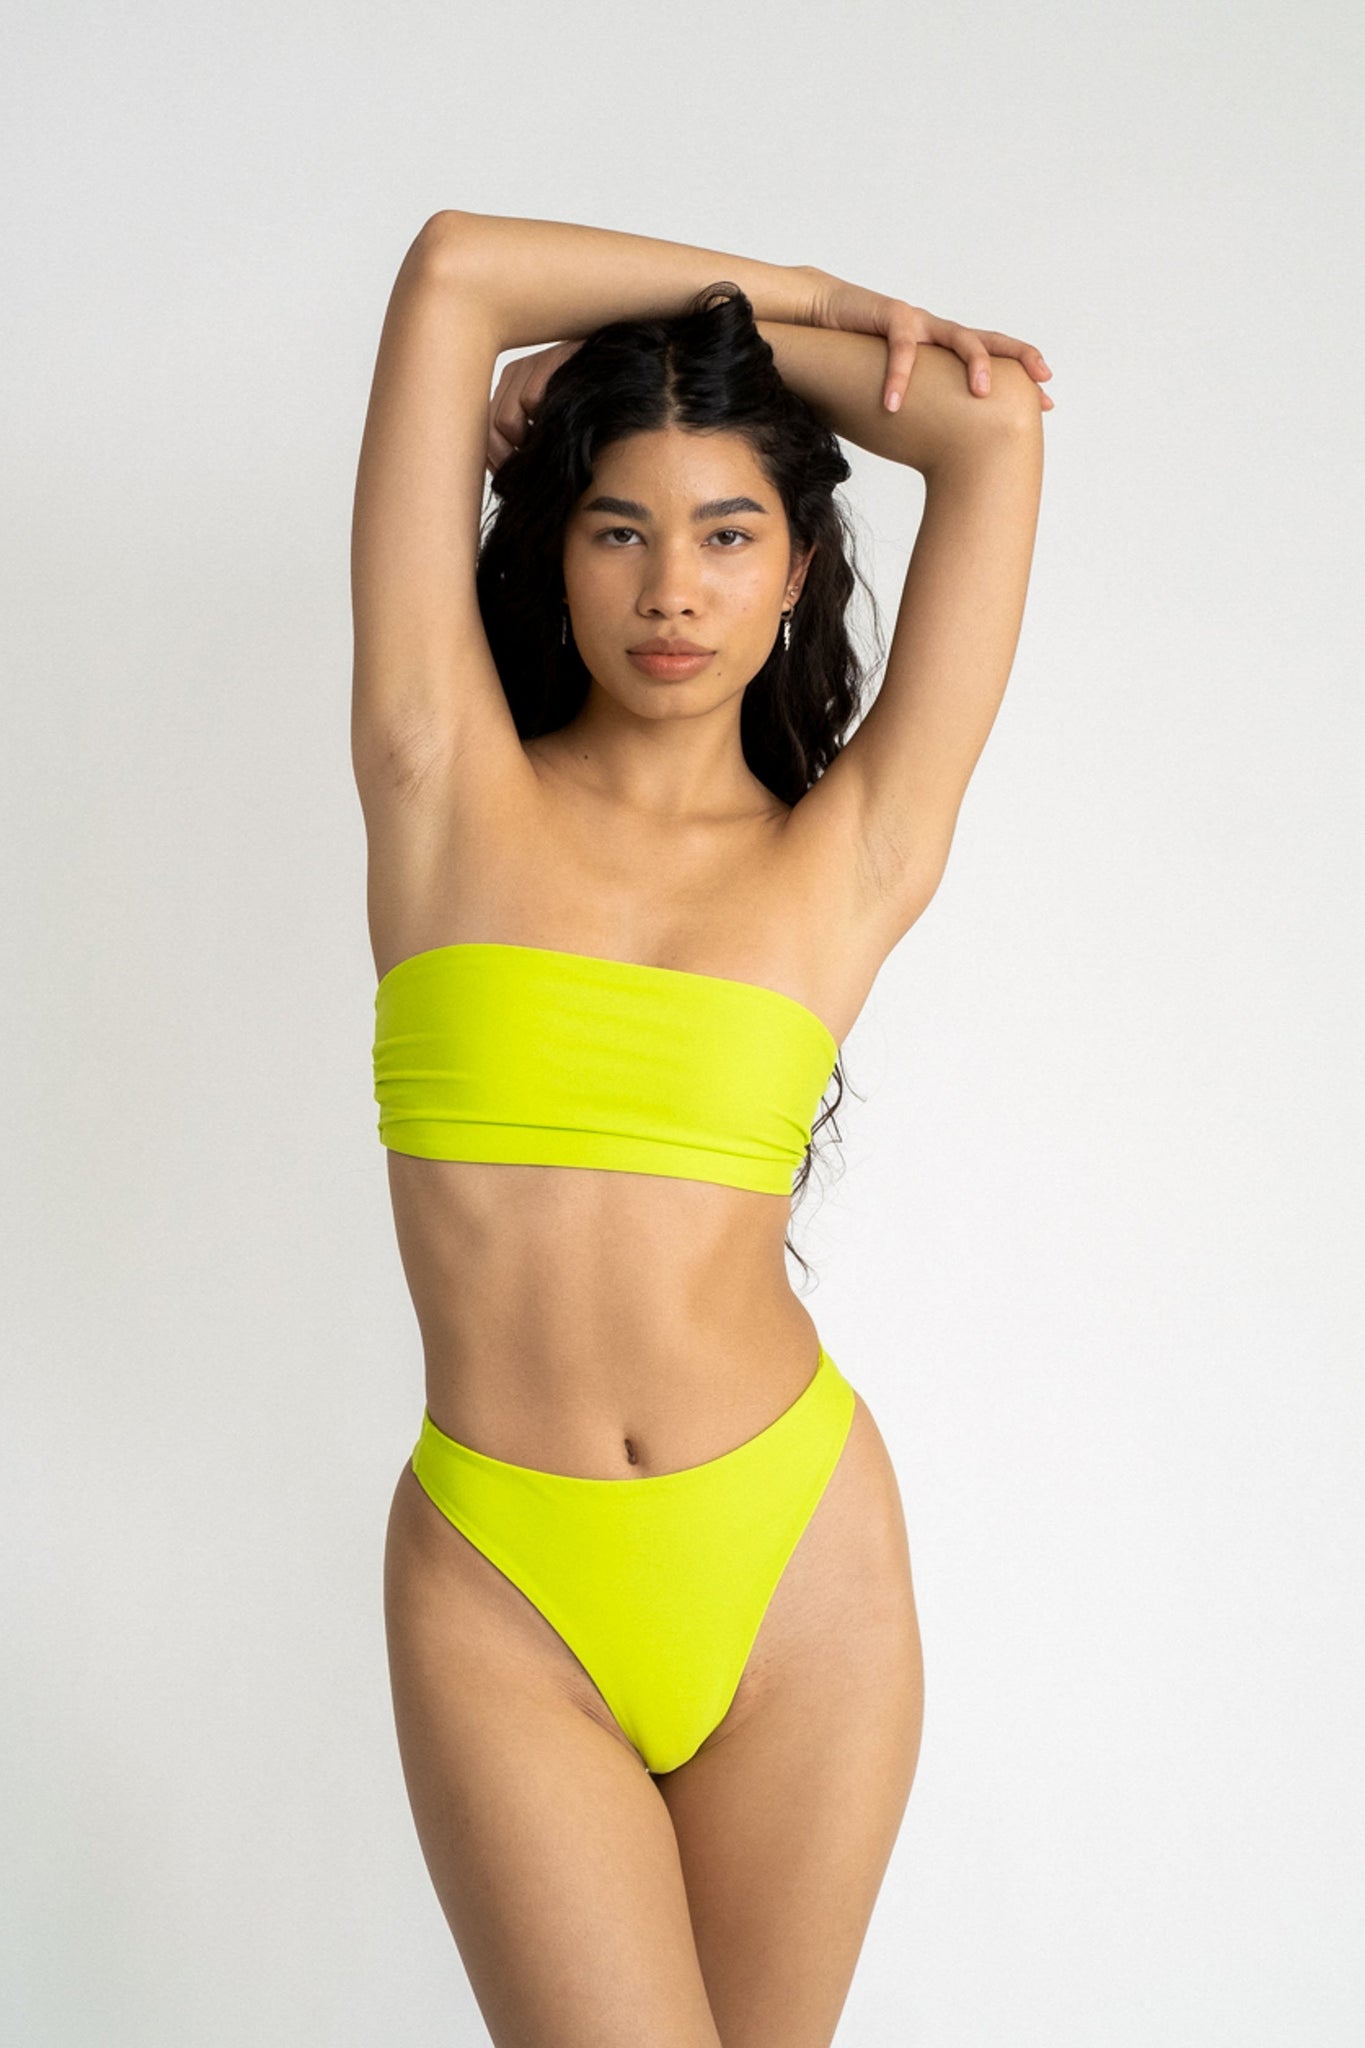 A woman standing with her arms folded above her head wearing neon green high cut bikini bottoms with a matching neon green strapless bandeau bikini top.